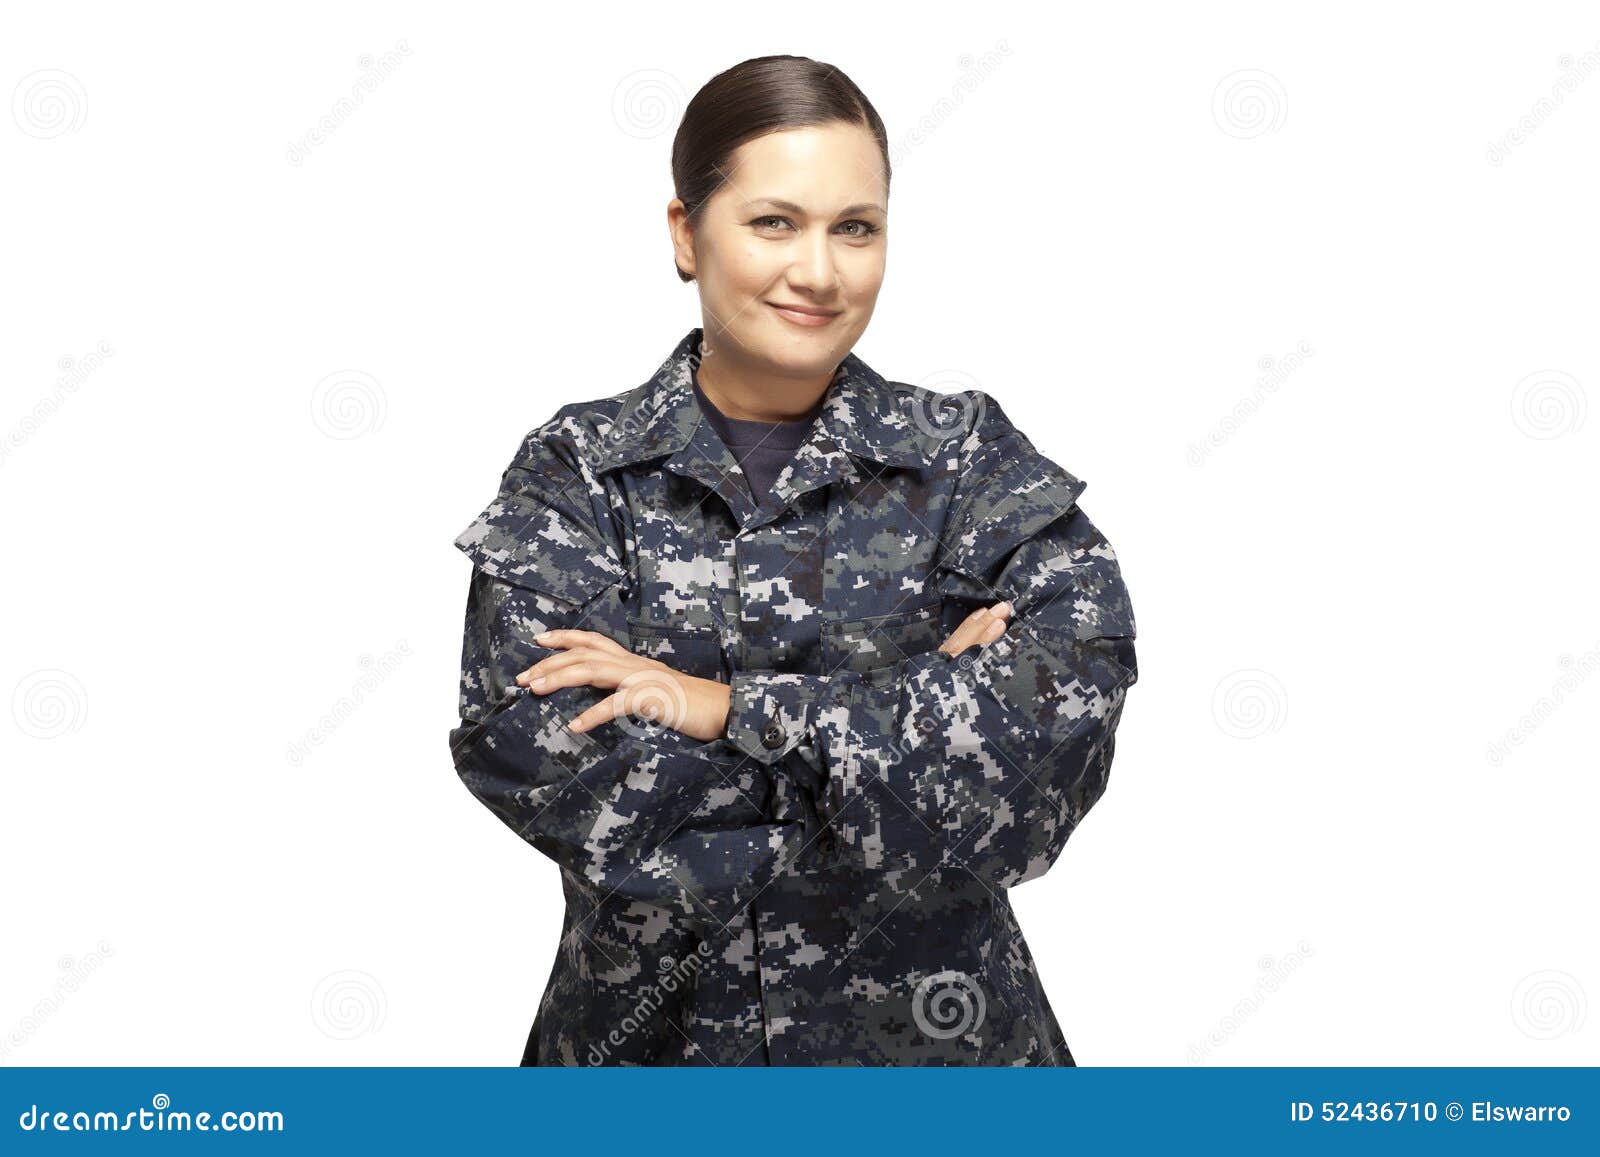 female in navy uniform with arms crossed